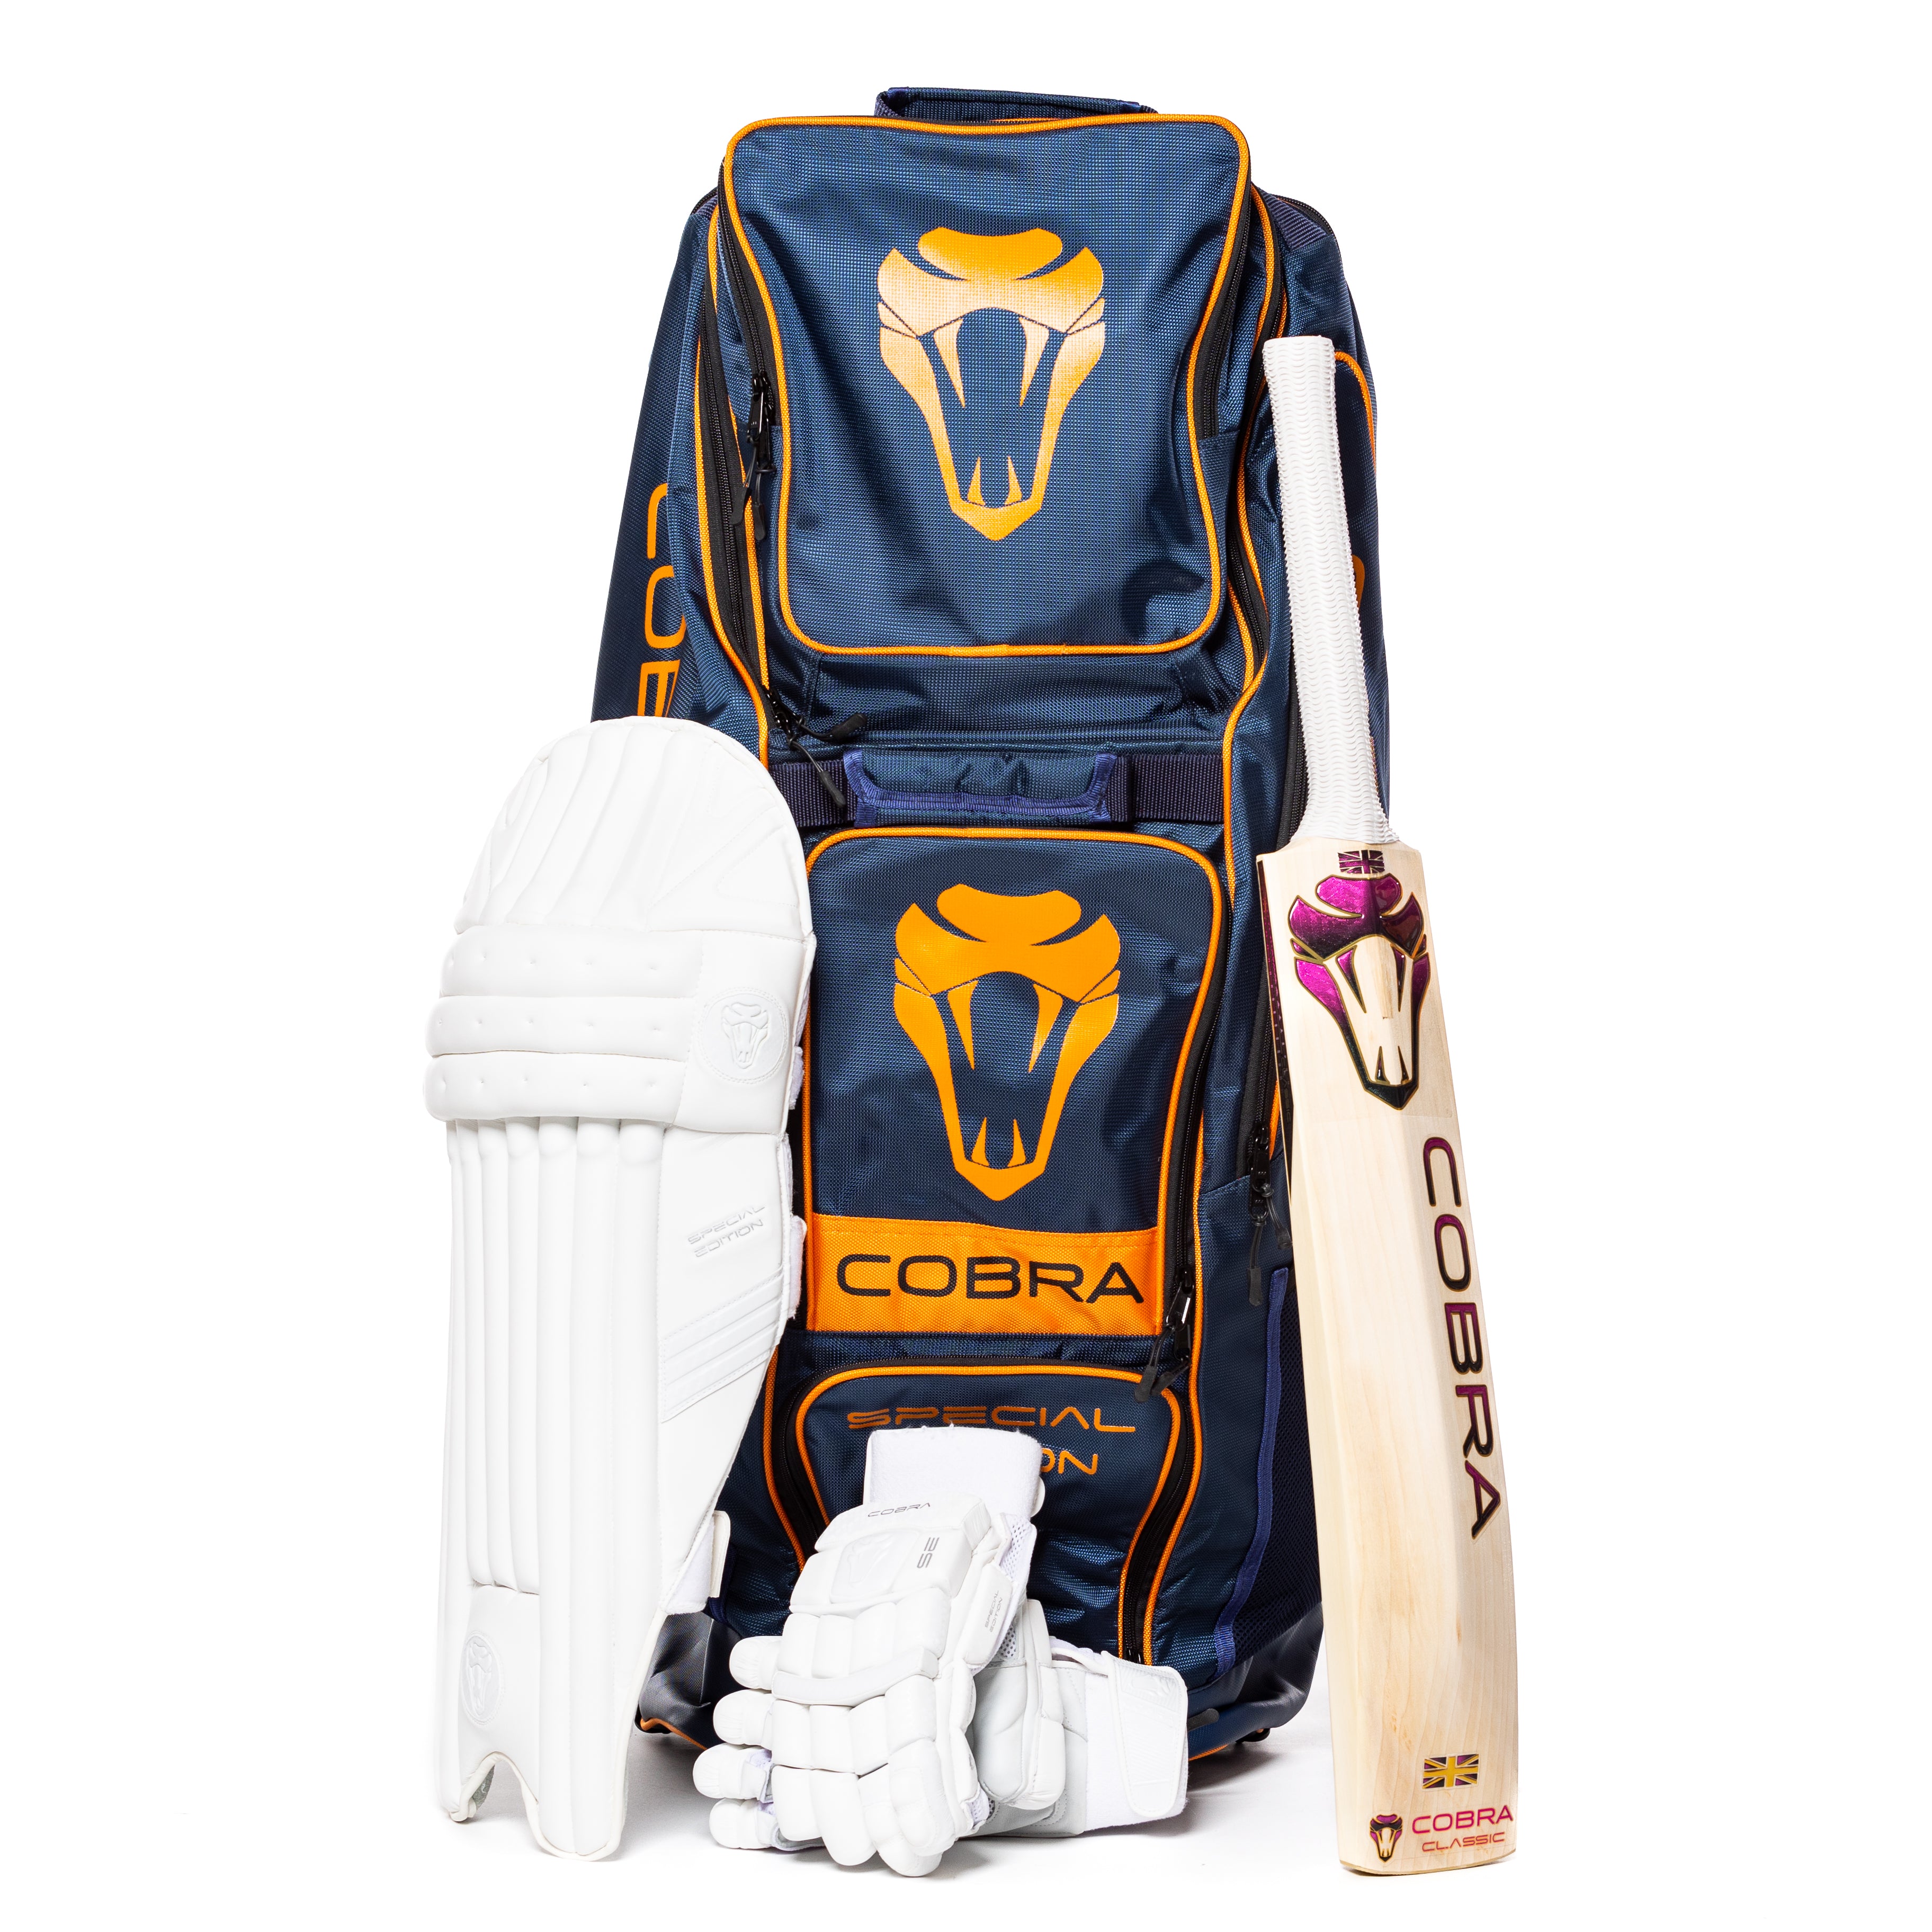 Top-Selling Cricket Gear: Unleash Your Cricketing Potential